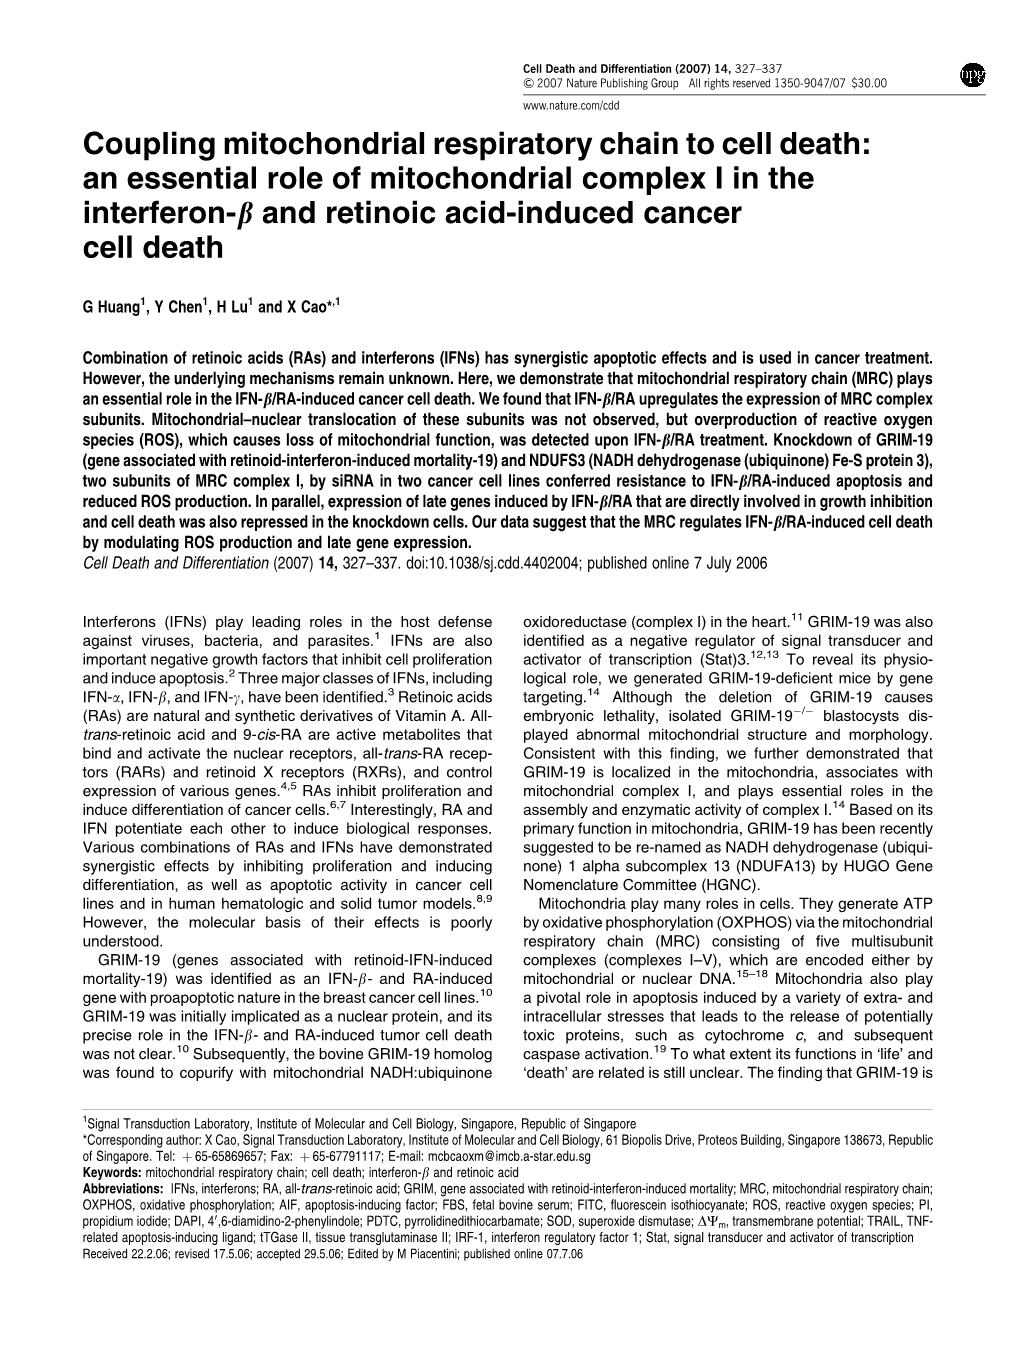 Coupling Mitochondrial Respiratory Chain to Cell Death: an Essential Role of Mitochondrial Complex I in the Interferon-B and Retinoic Acid-Induced Cancer Cell Death